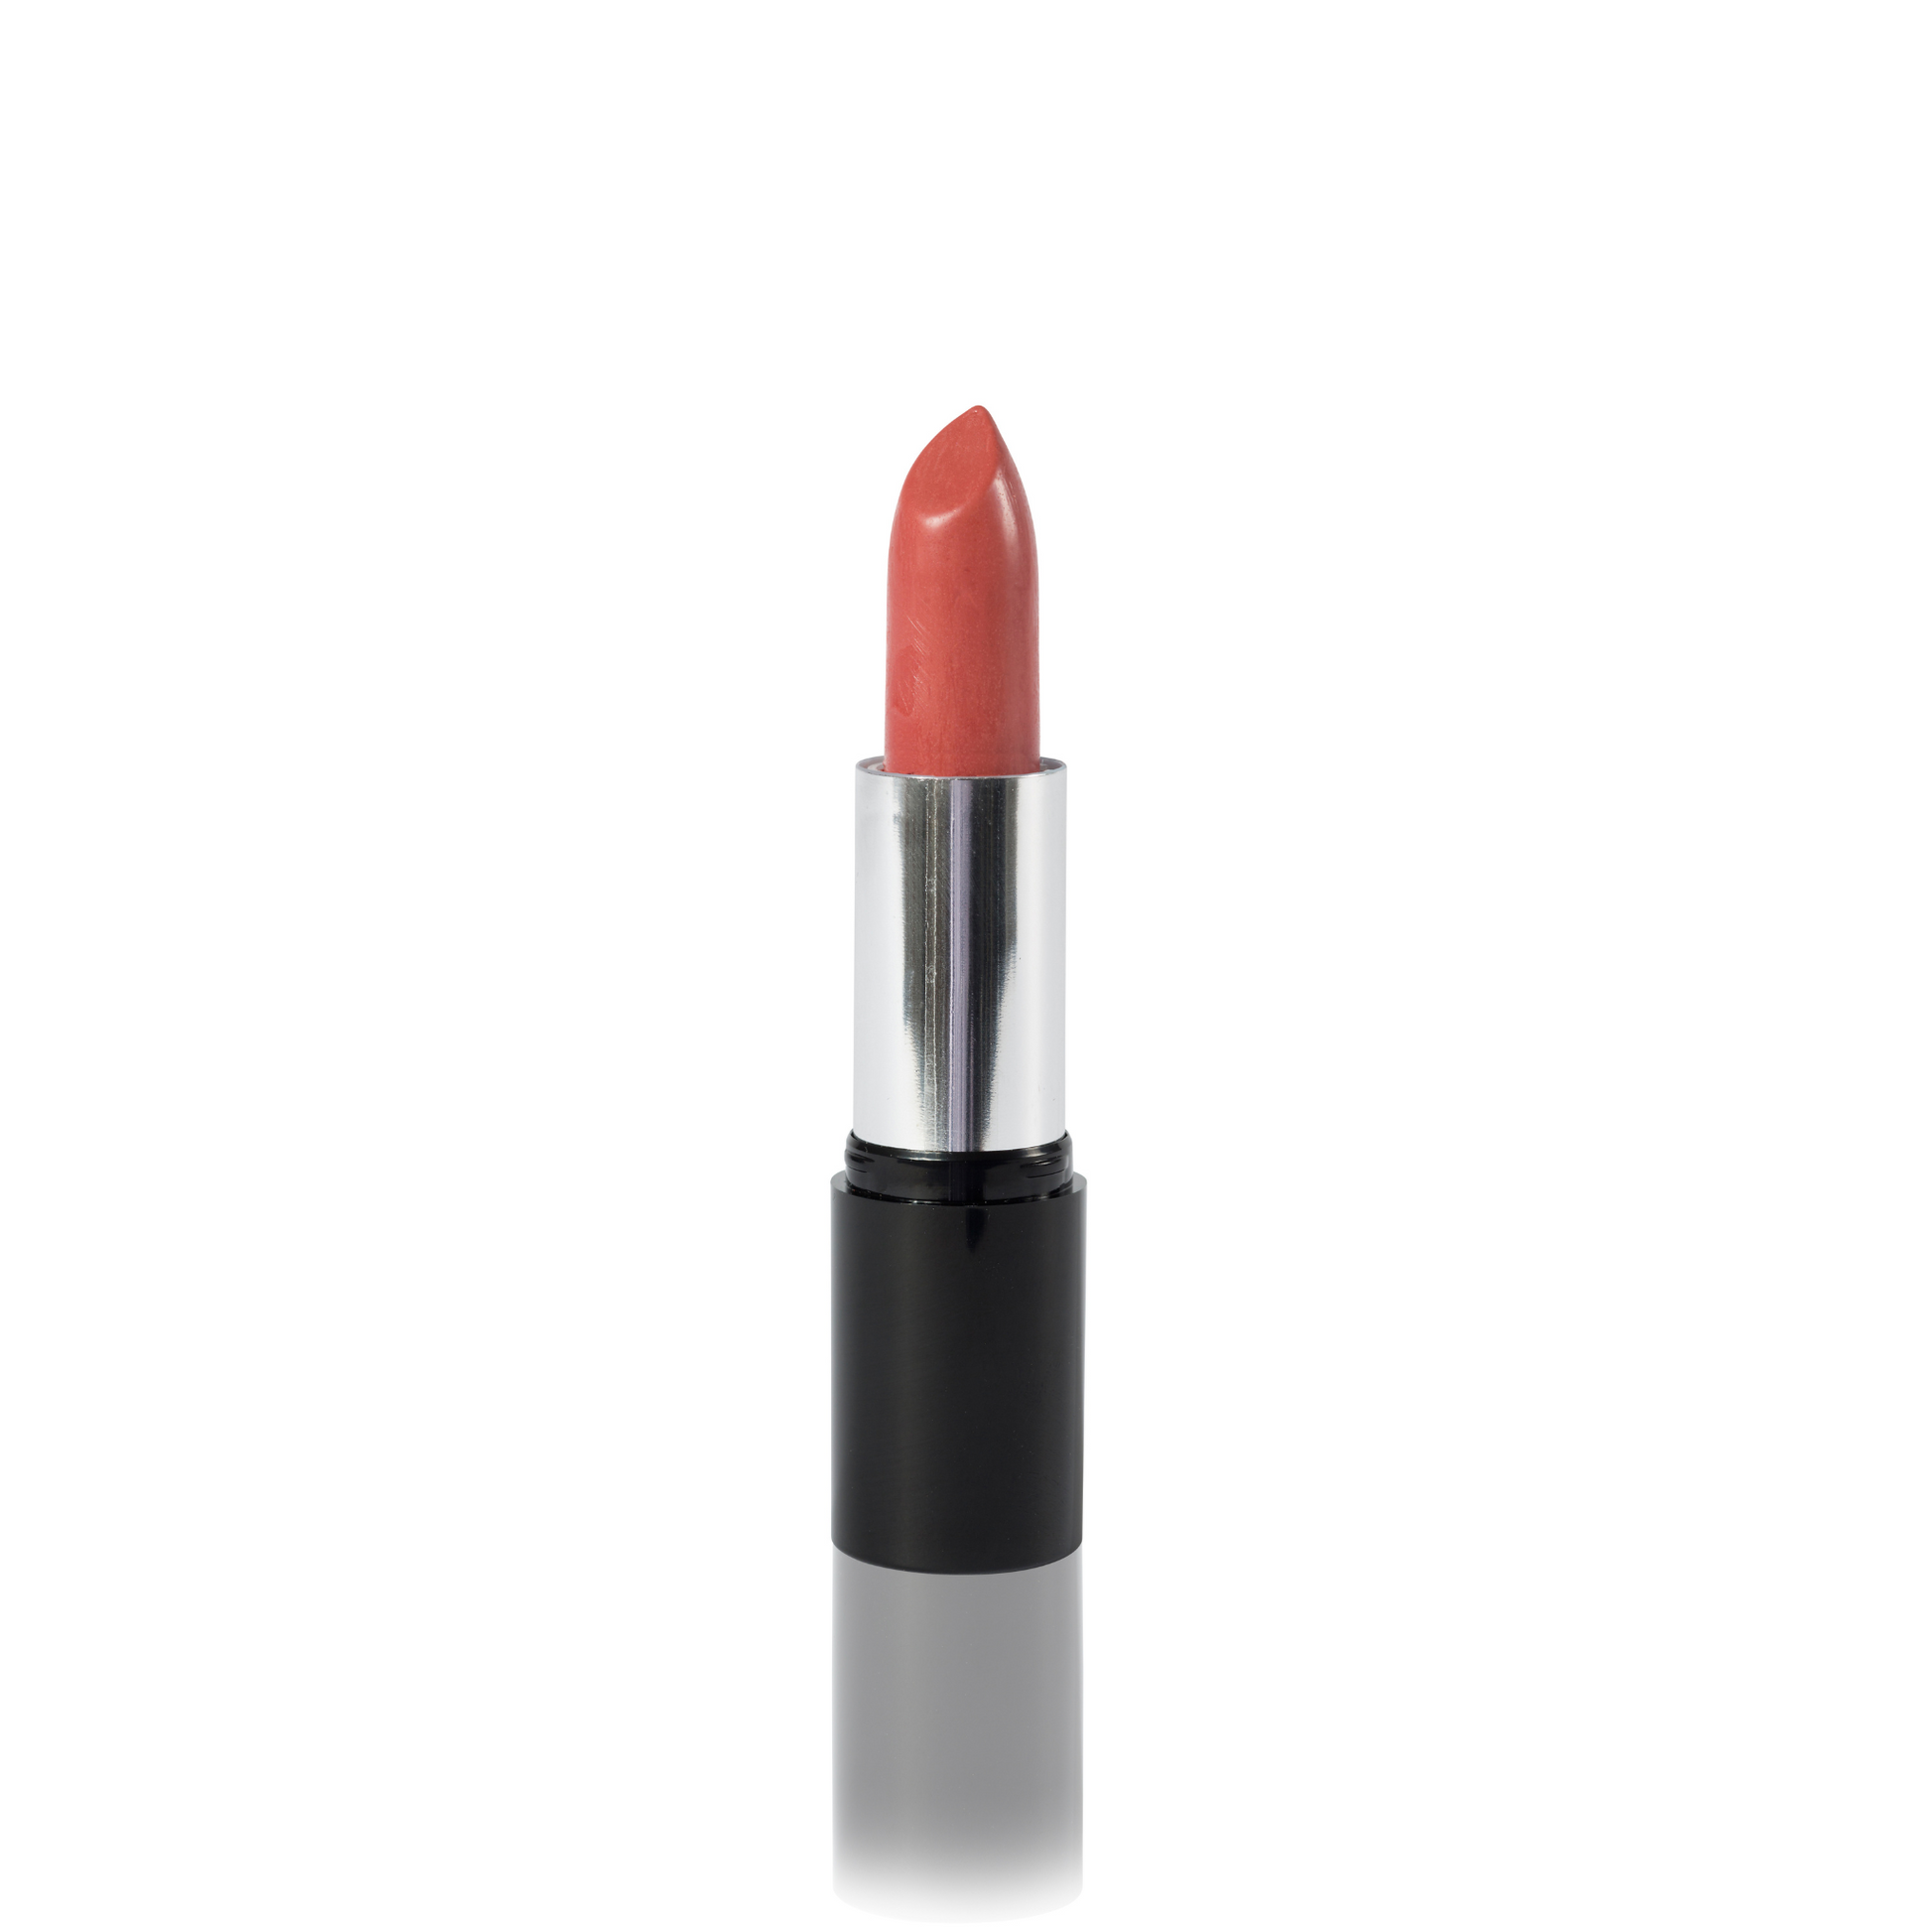 A single tube of the Odylique Rose Parfait lipstick with the cap removed, revealing the mid-rose pink shade, set against a plain white background.